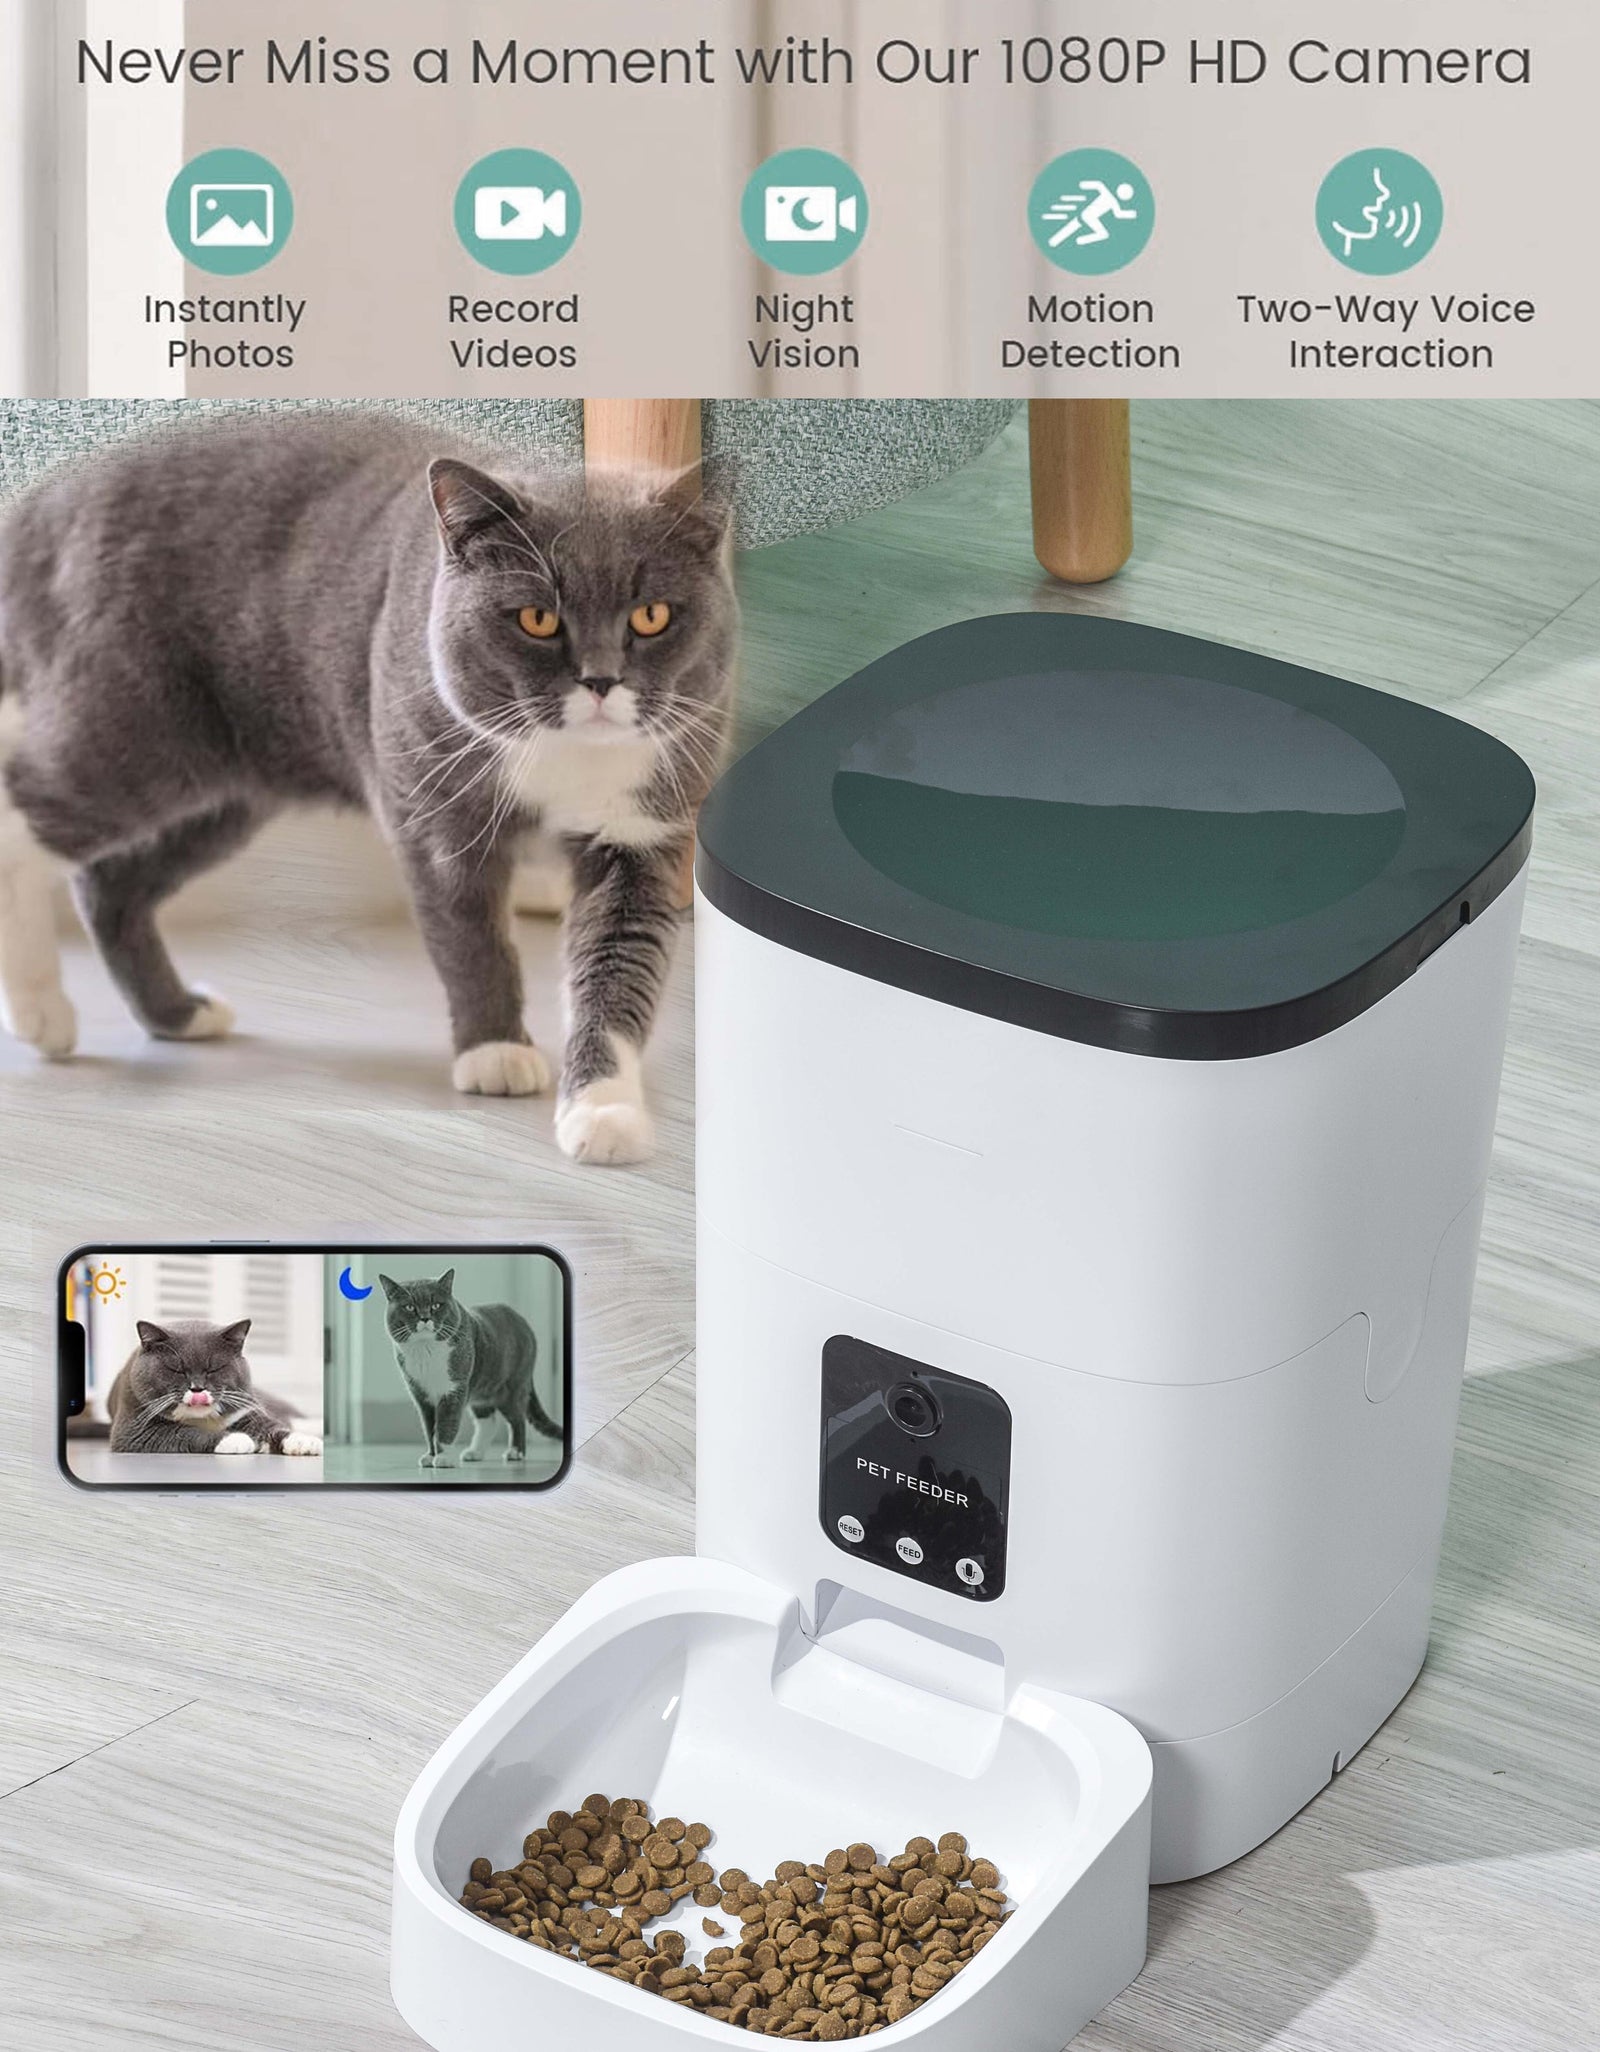 Pet Feeder,6L Automatic Pet Feeder for Cats and Dogs,1080P Camera,App Control,Voice Recorder,Timed Feeder for Schedule Feeding, Dual Power Supply,Wifi Pet Food Dispenser with App Control